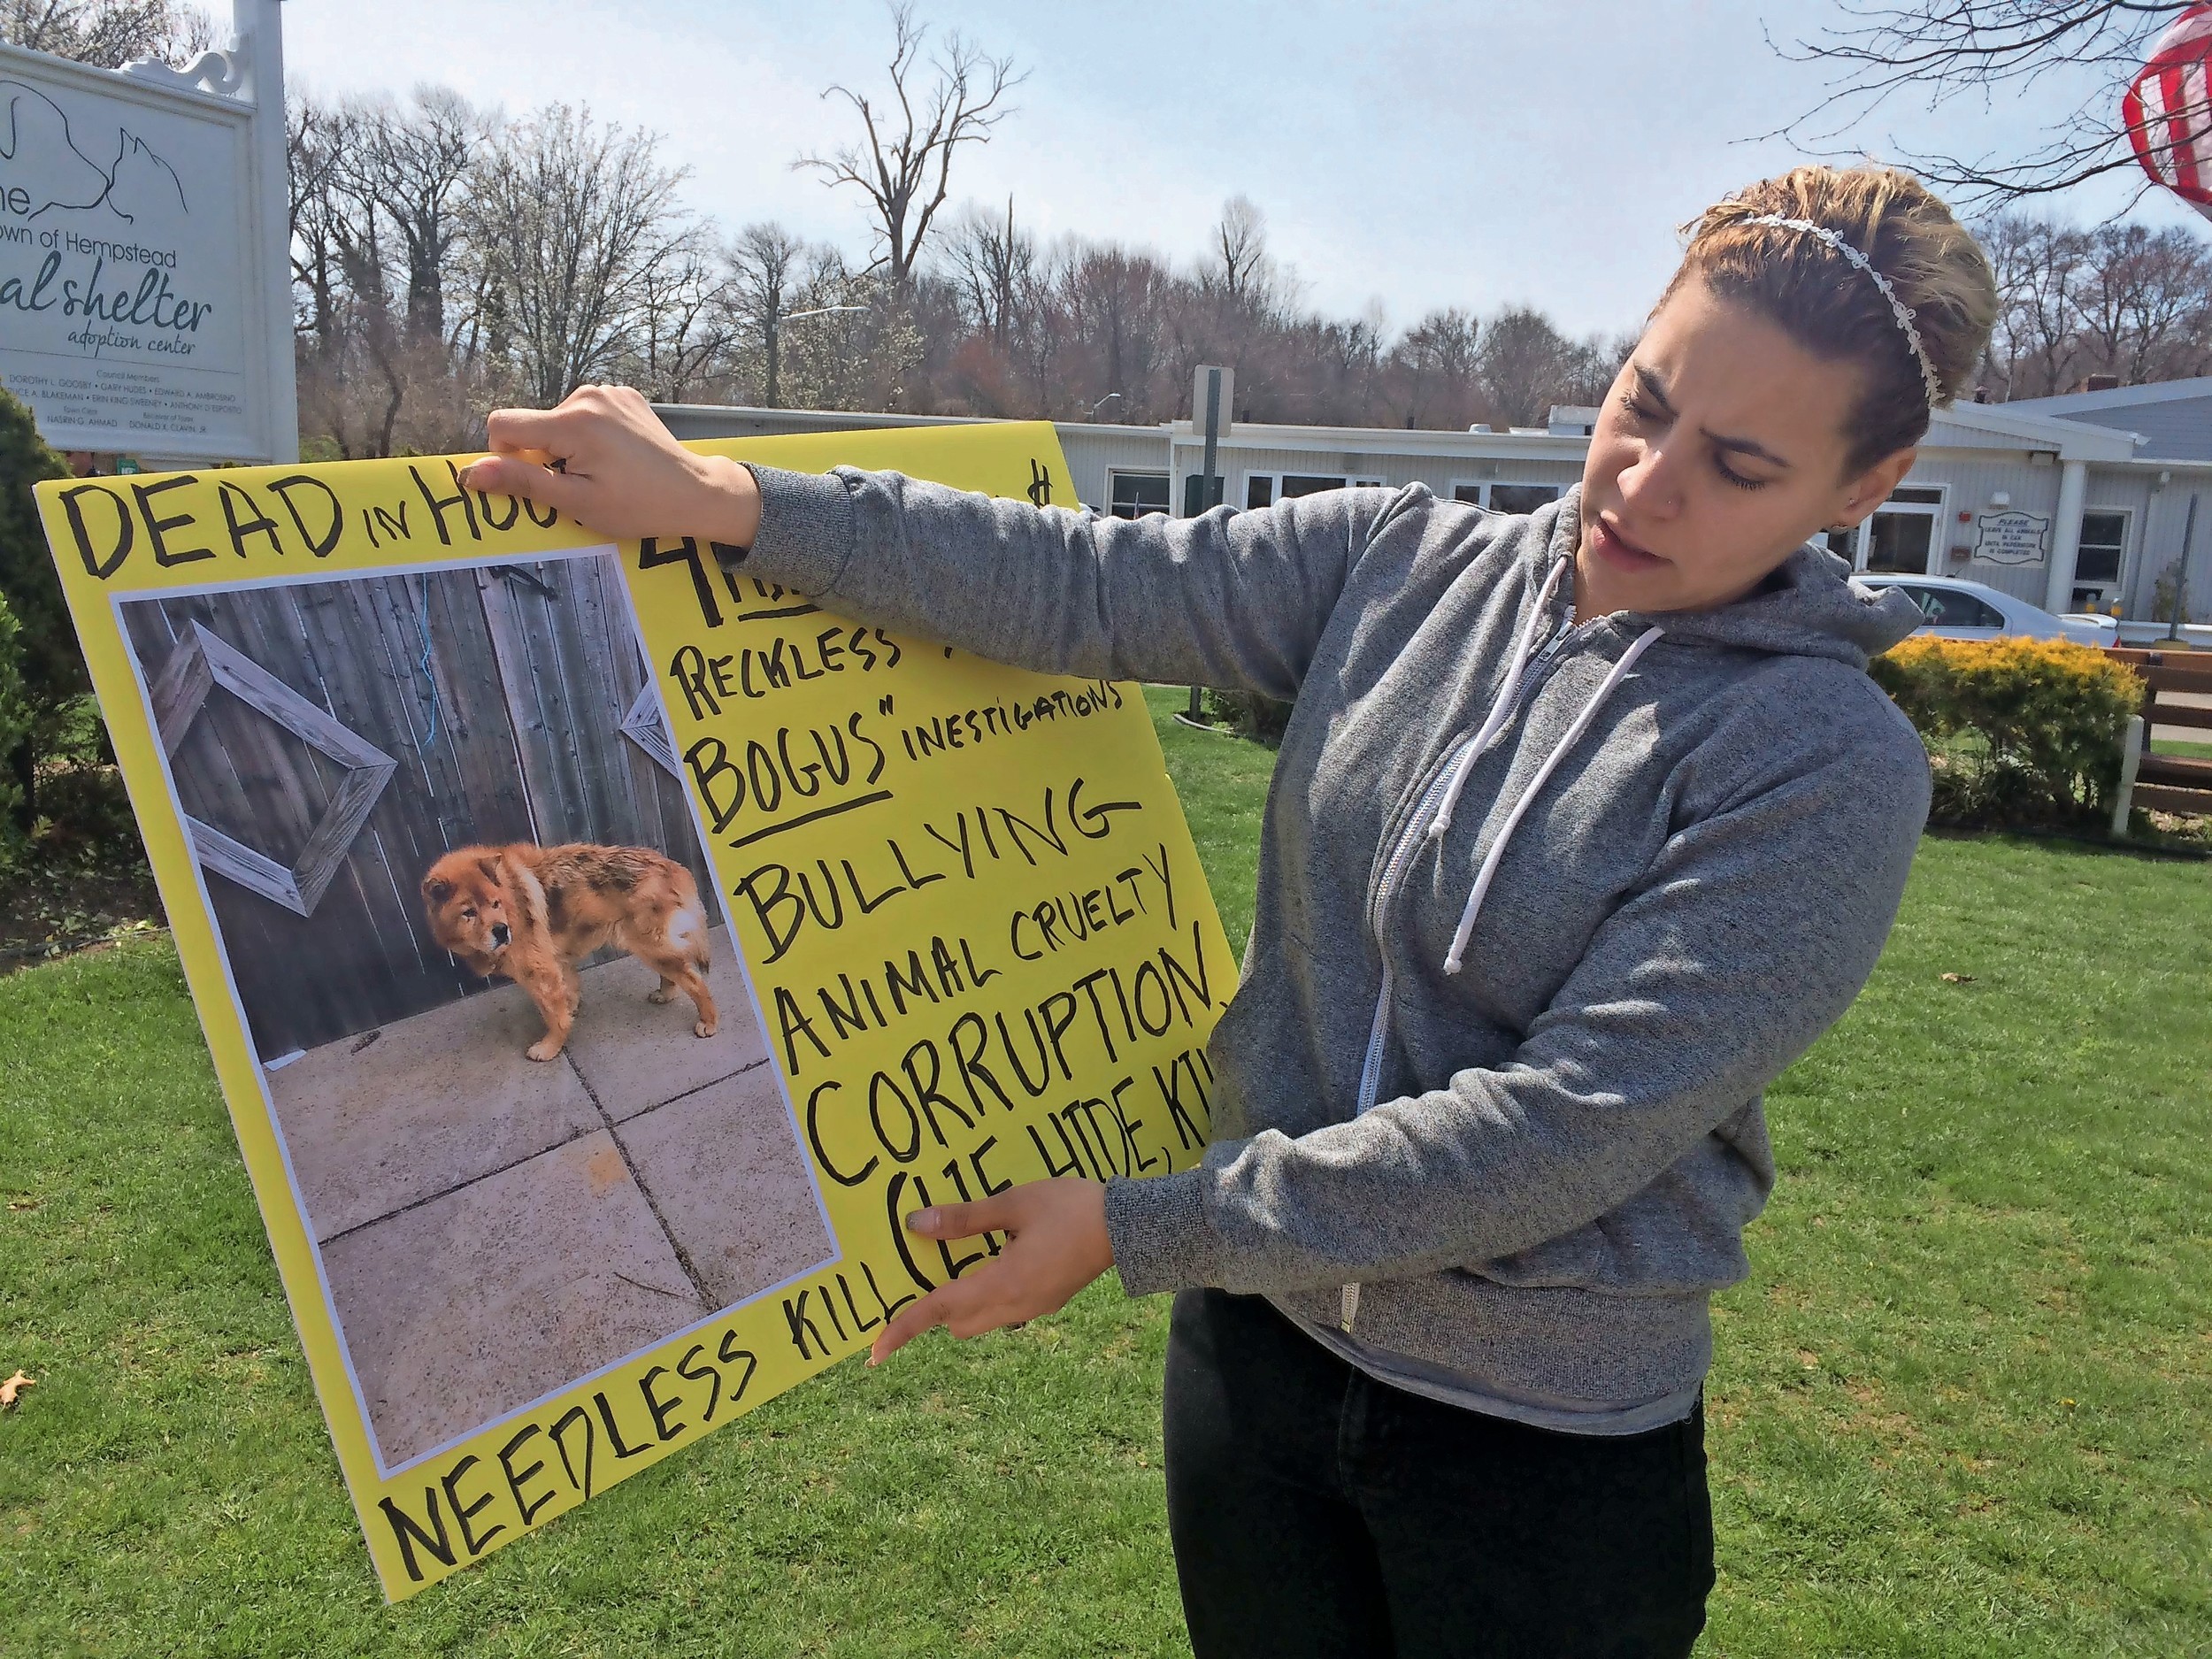 Jessica De La Rosa, of Freeport, is calling for an investigation of the Hempstead Town Animal Shelter, after her dog, Oso, escaped from her home last week and was euthanized before she was notified.